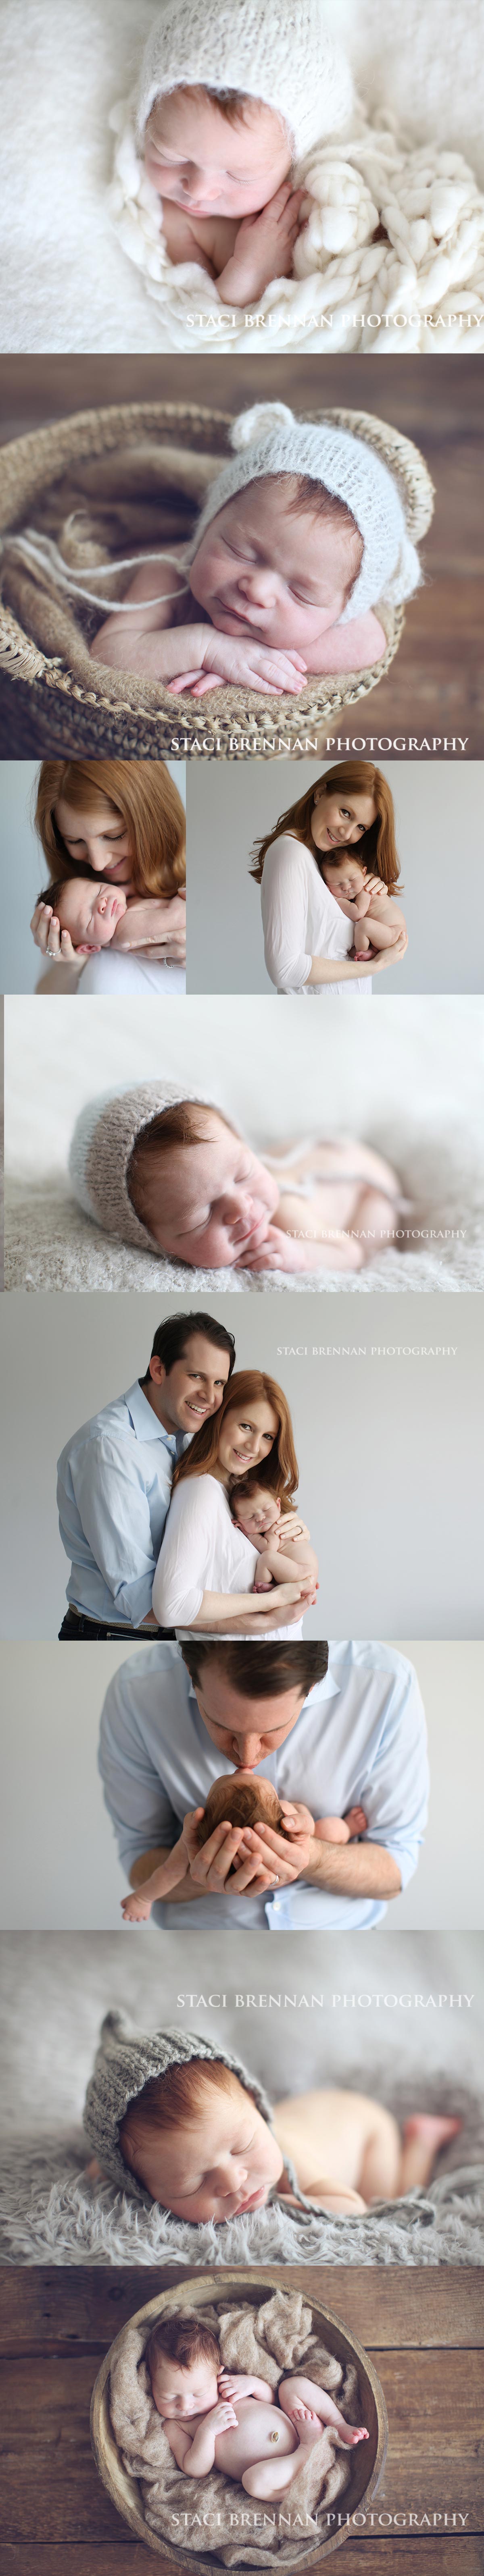 NYC Baby Photography